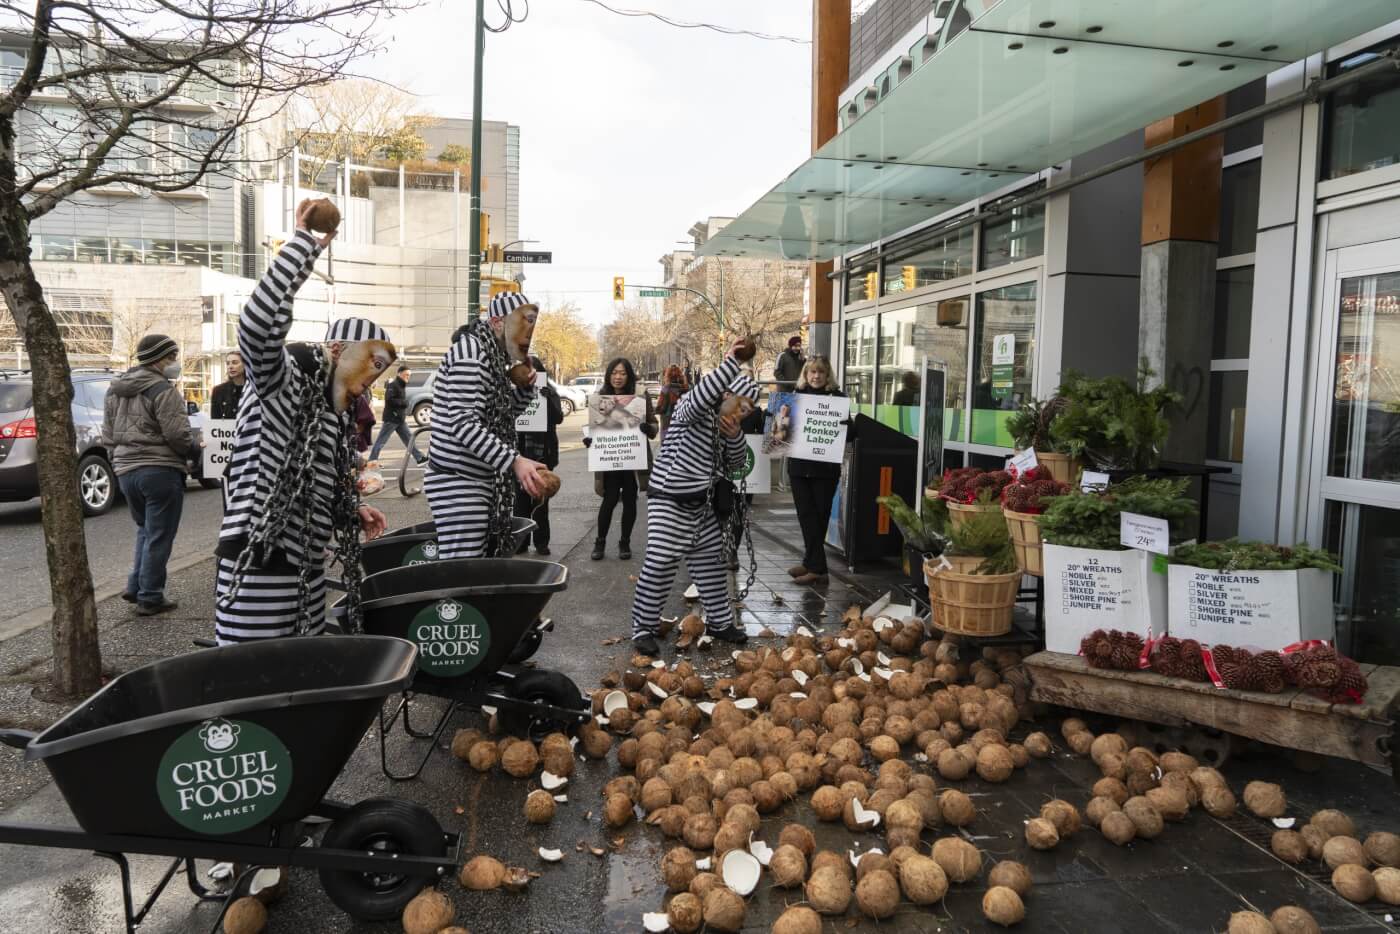 PETA supporters dressed in black and white striped clothing with chains around them and monkey masks on, dropping ethically sourced coconuts outside of a Whole Foods store in Vancouver, as a peaceful demonstration protesting coconut milk obtained from Thailand monkey labor